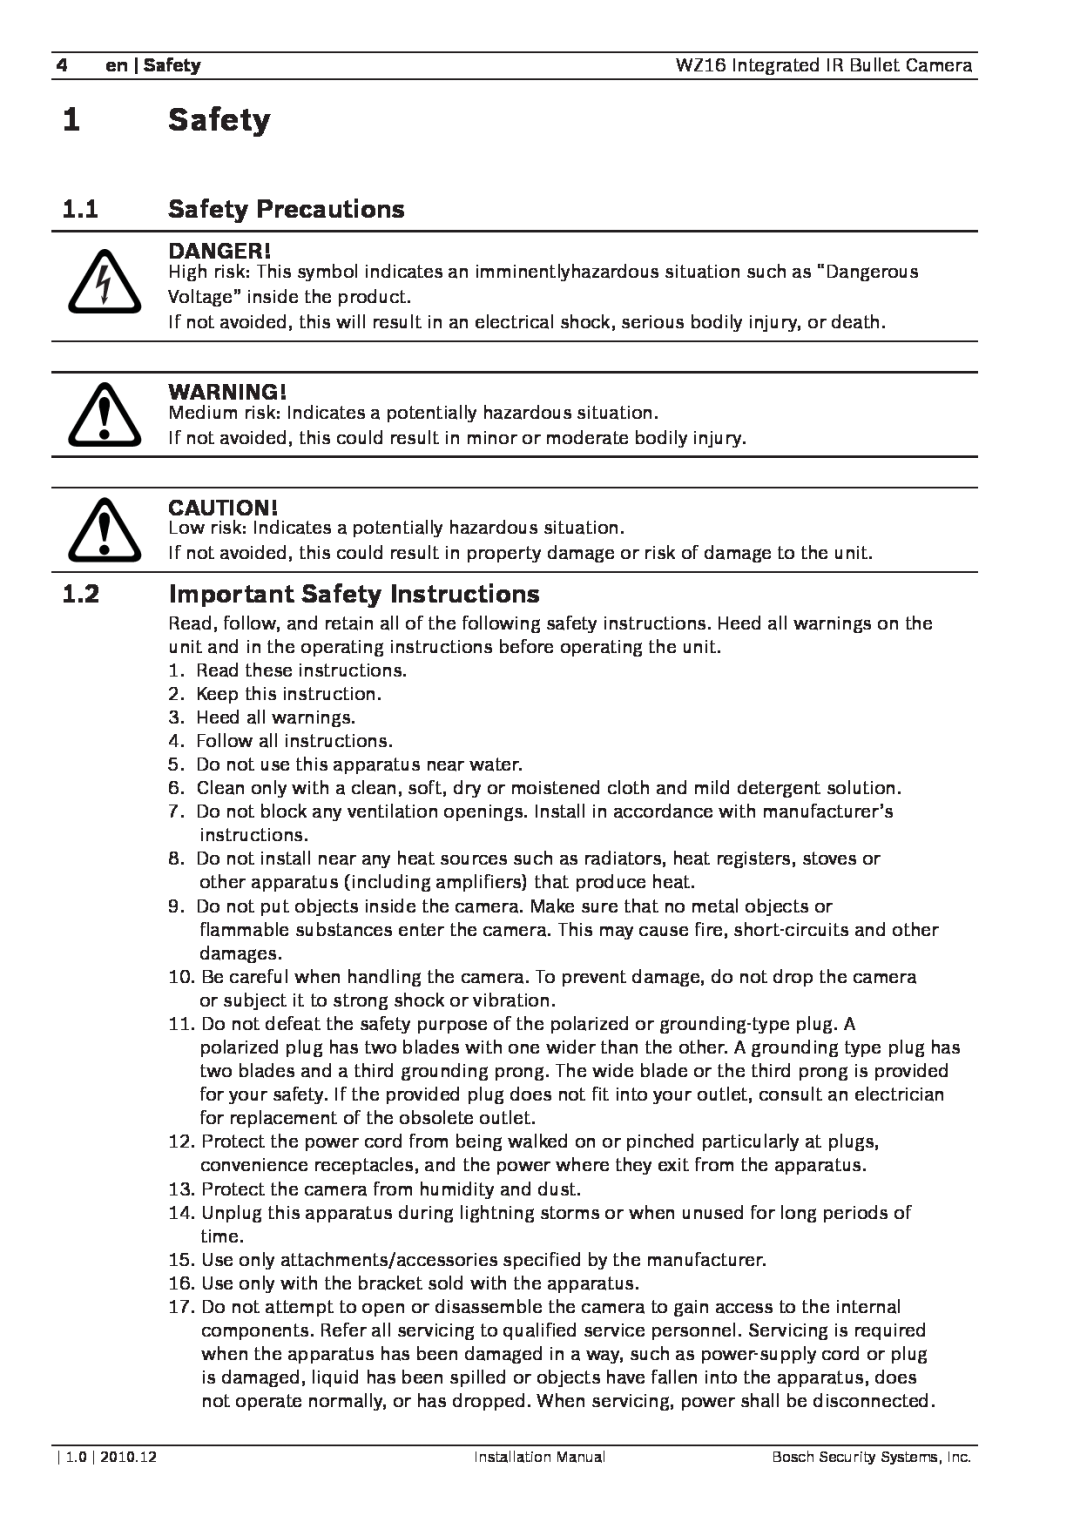 Bosch Appliances WZ16 installation manual 1.1Safety Precautions, 1.2Important Safety Instructions, en Safety 